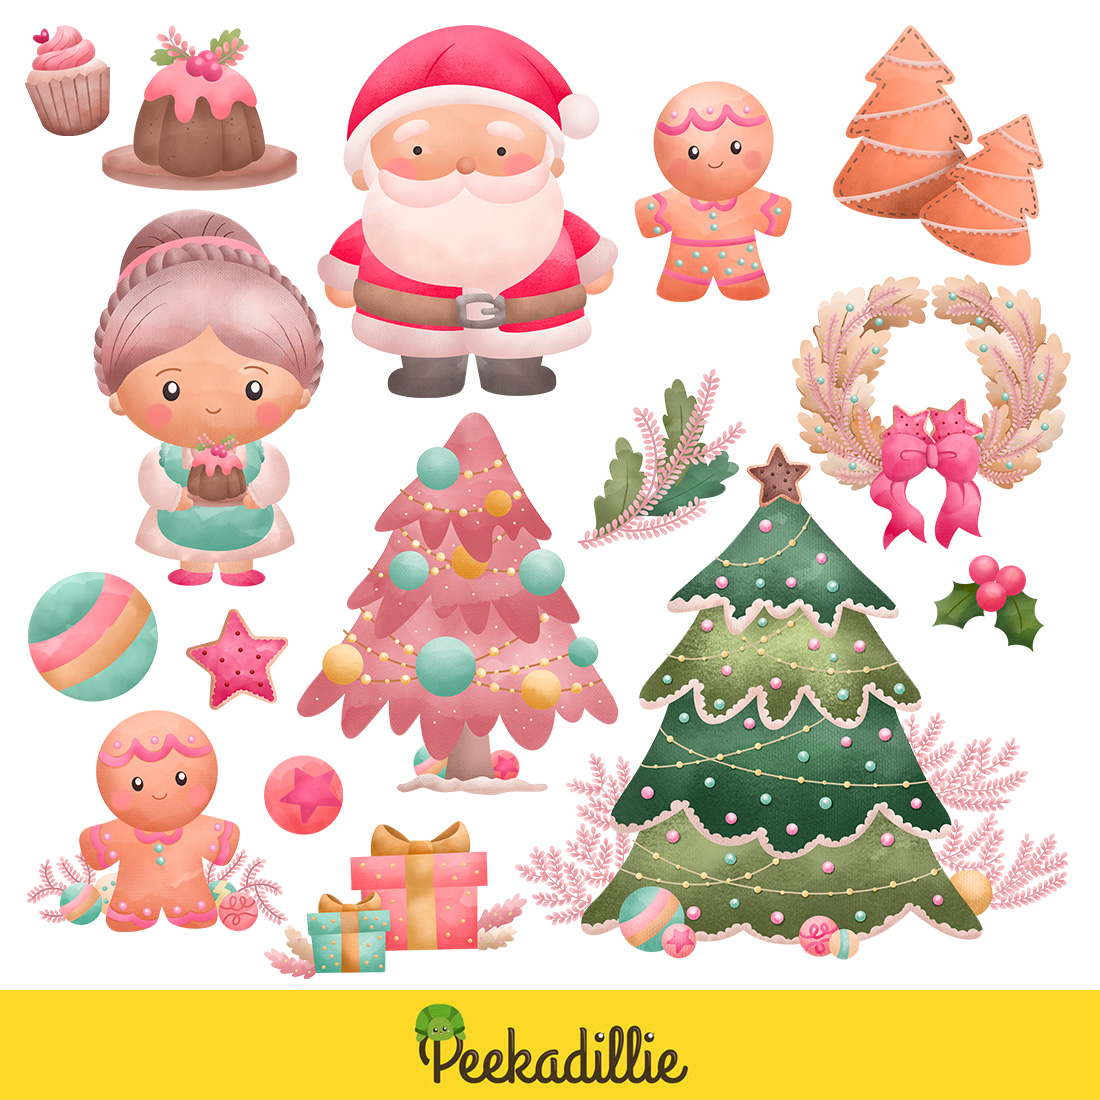 Watercolour Cute Seasonal December Christmas In Pink Decoration Background Santa Claus Gingerbread Grandmother Ornaments Tree Accessories Holiday Illustration Vector Clipart Sticker preview image.